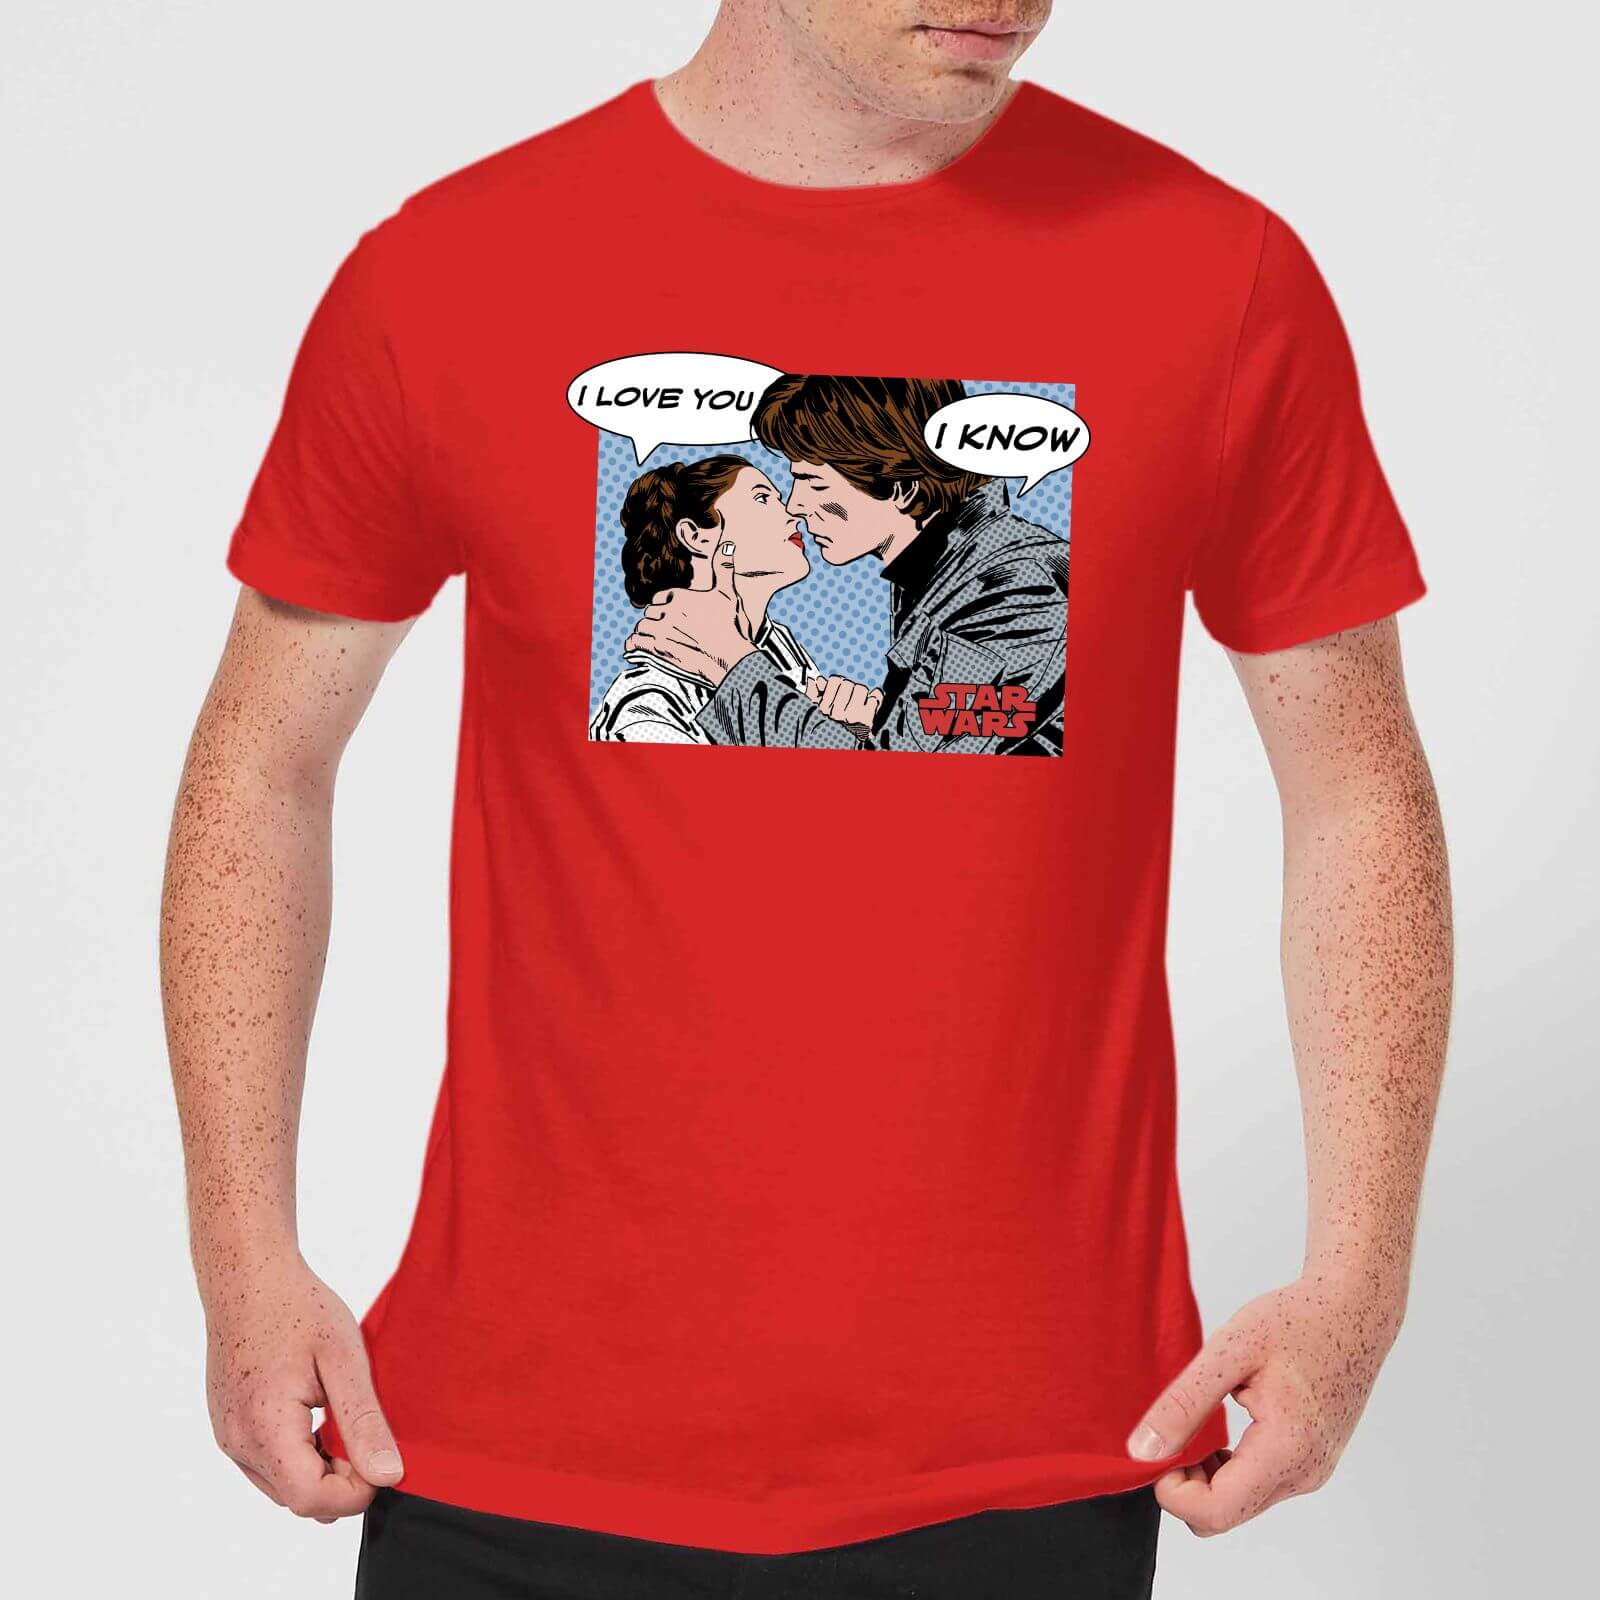 Star Wars Leia Han Solo Love Men's T-Shirt - Red - S - Red